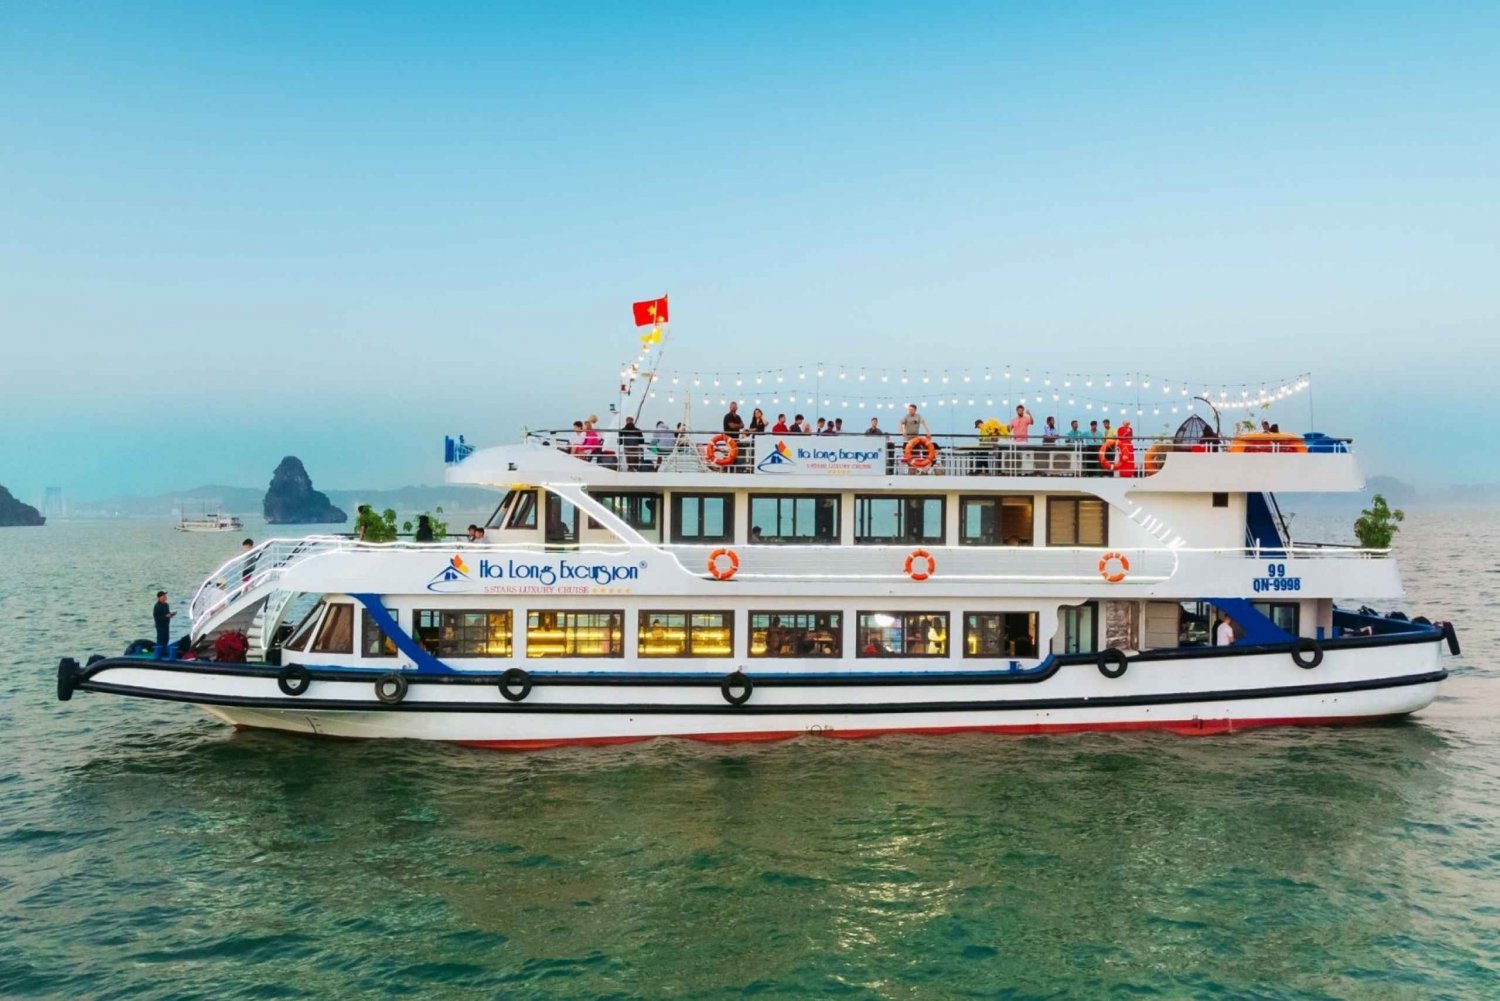 From Hanoi: 05 Stars Day Cruise/meals, kayak, Sunset party